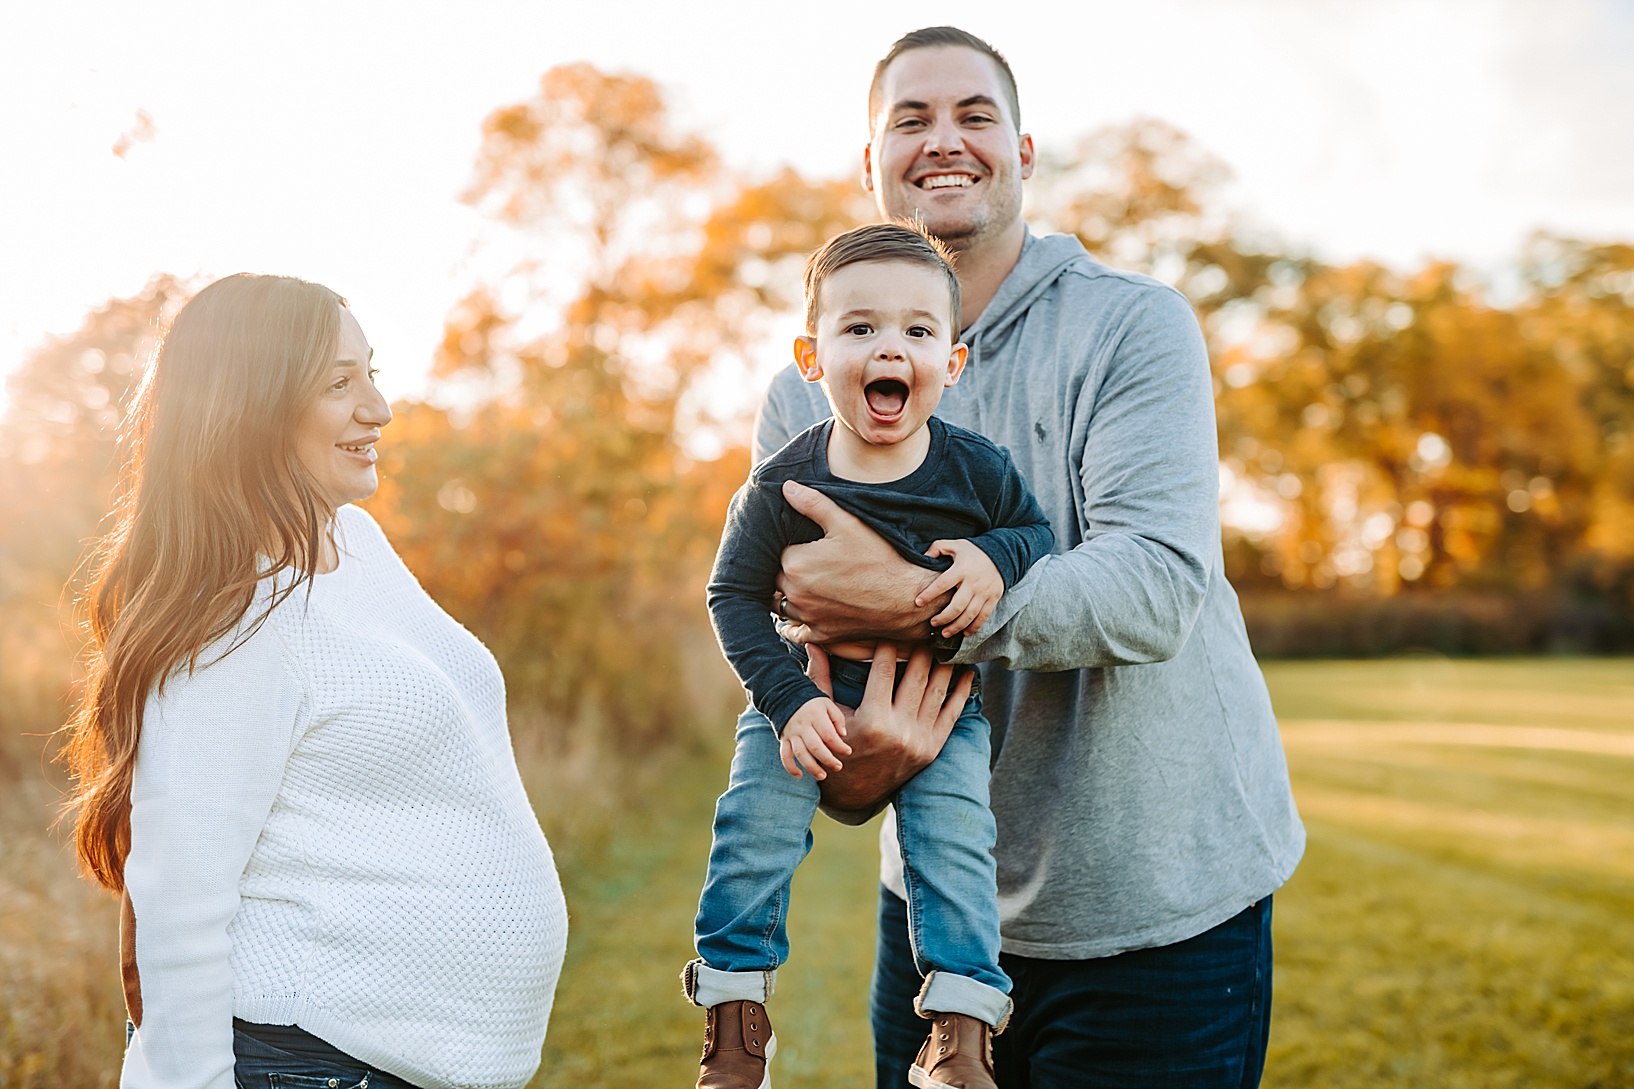 dad swinging laughing little boy in the air while pregnant woman smiles at them